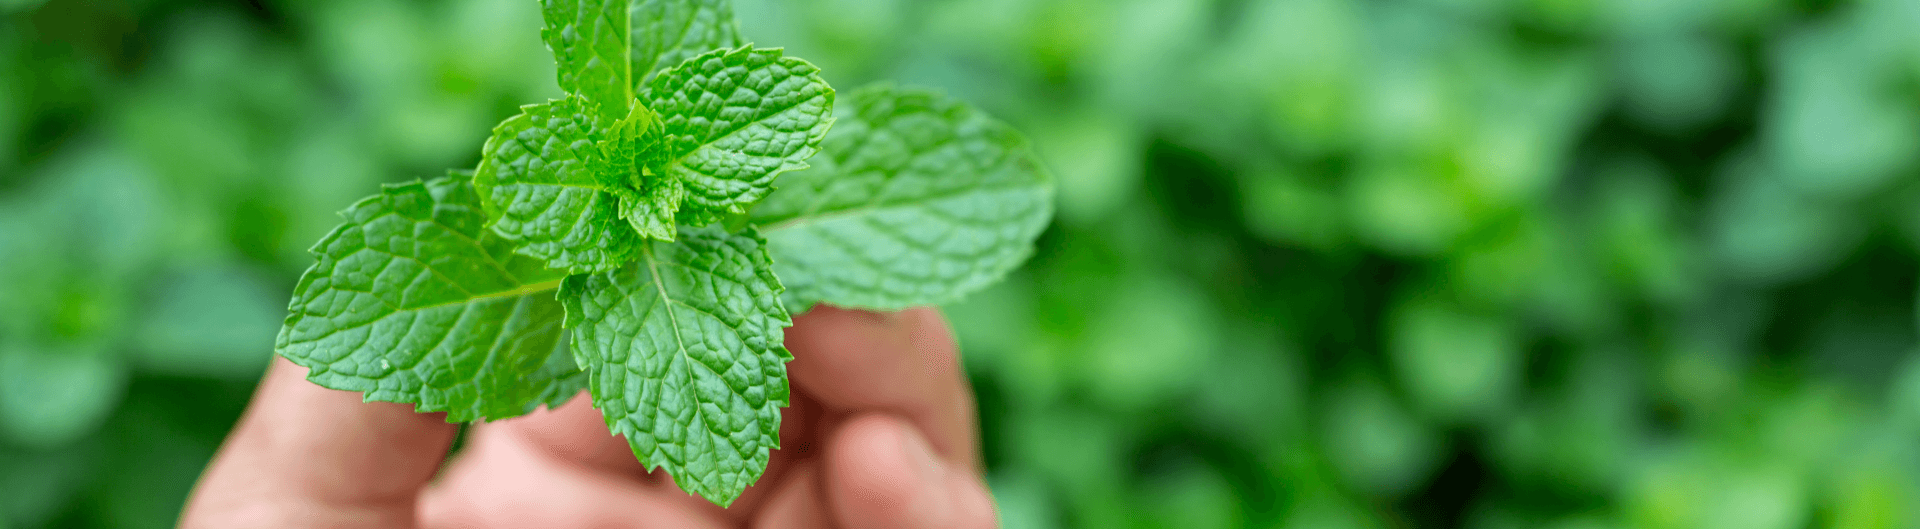 How to Make Invigorating Peppermint Shower Cleaning Spray